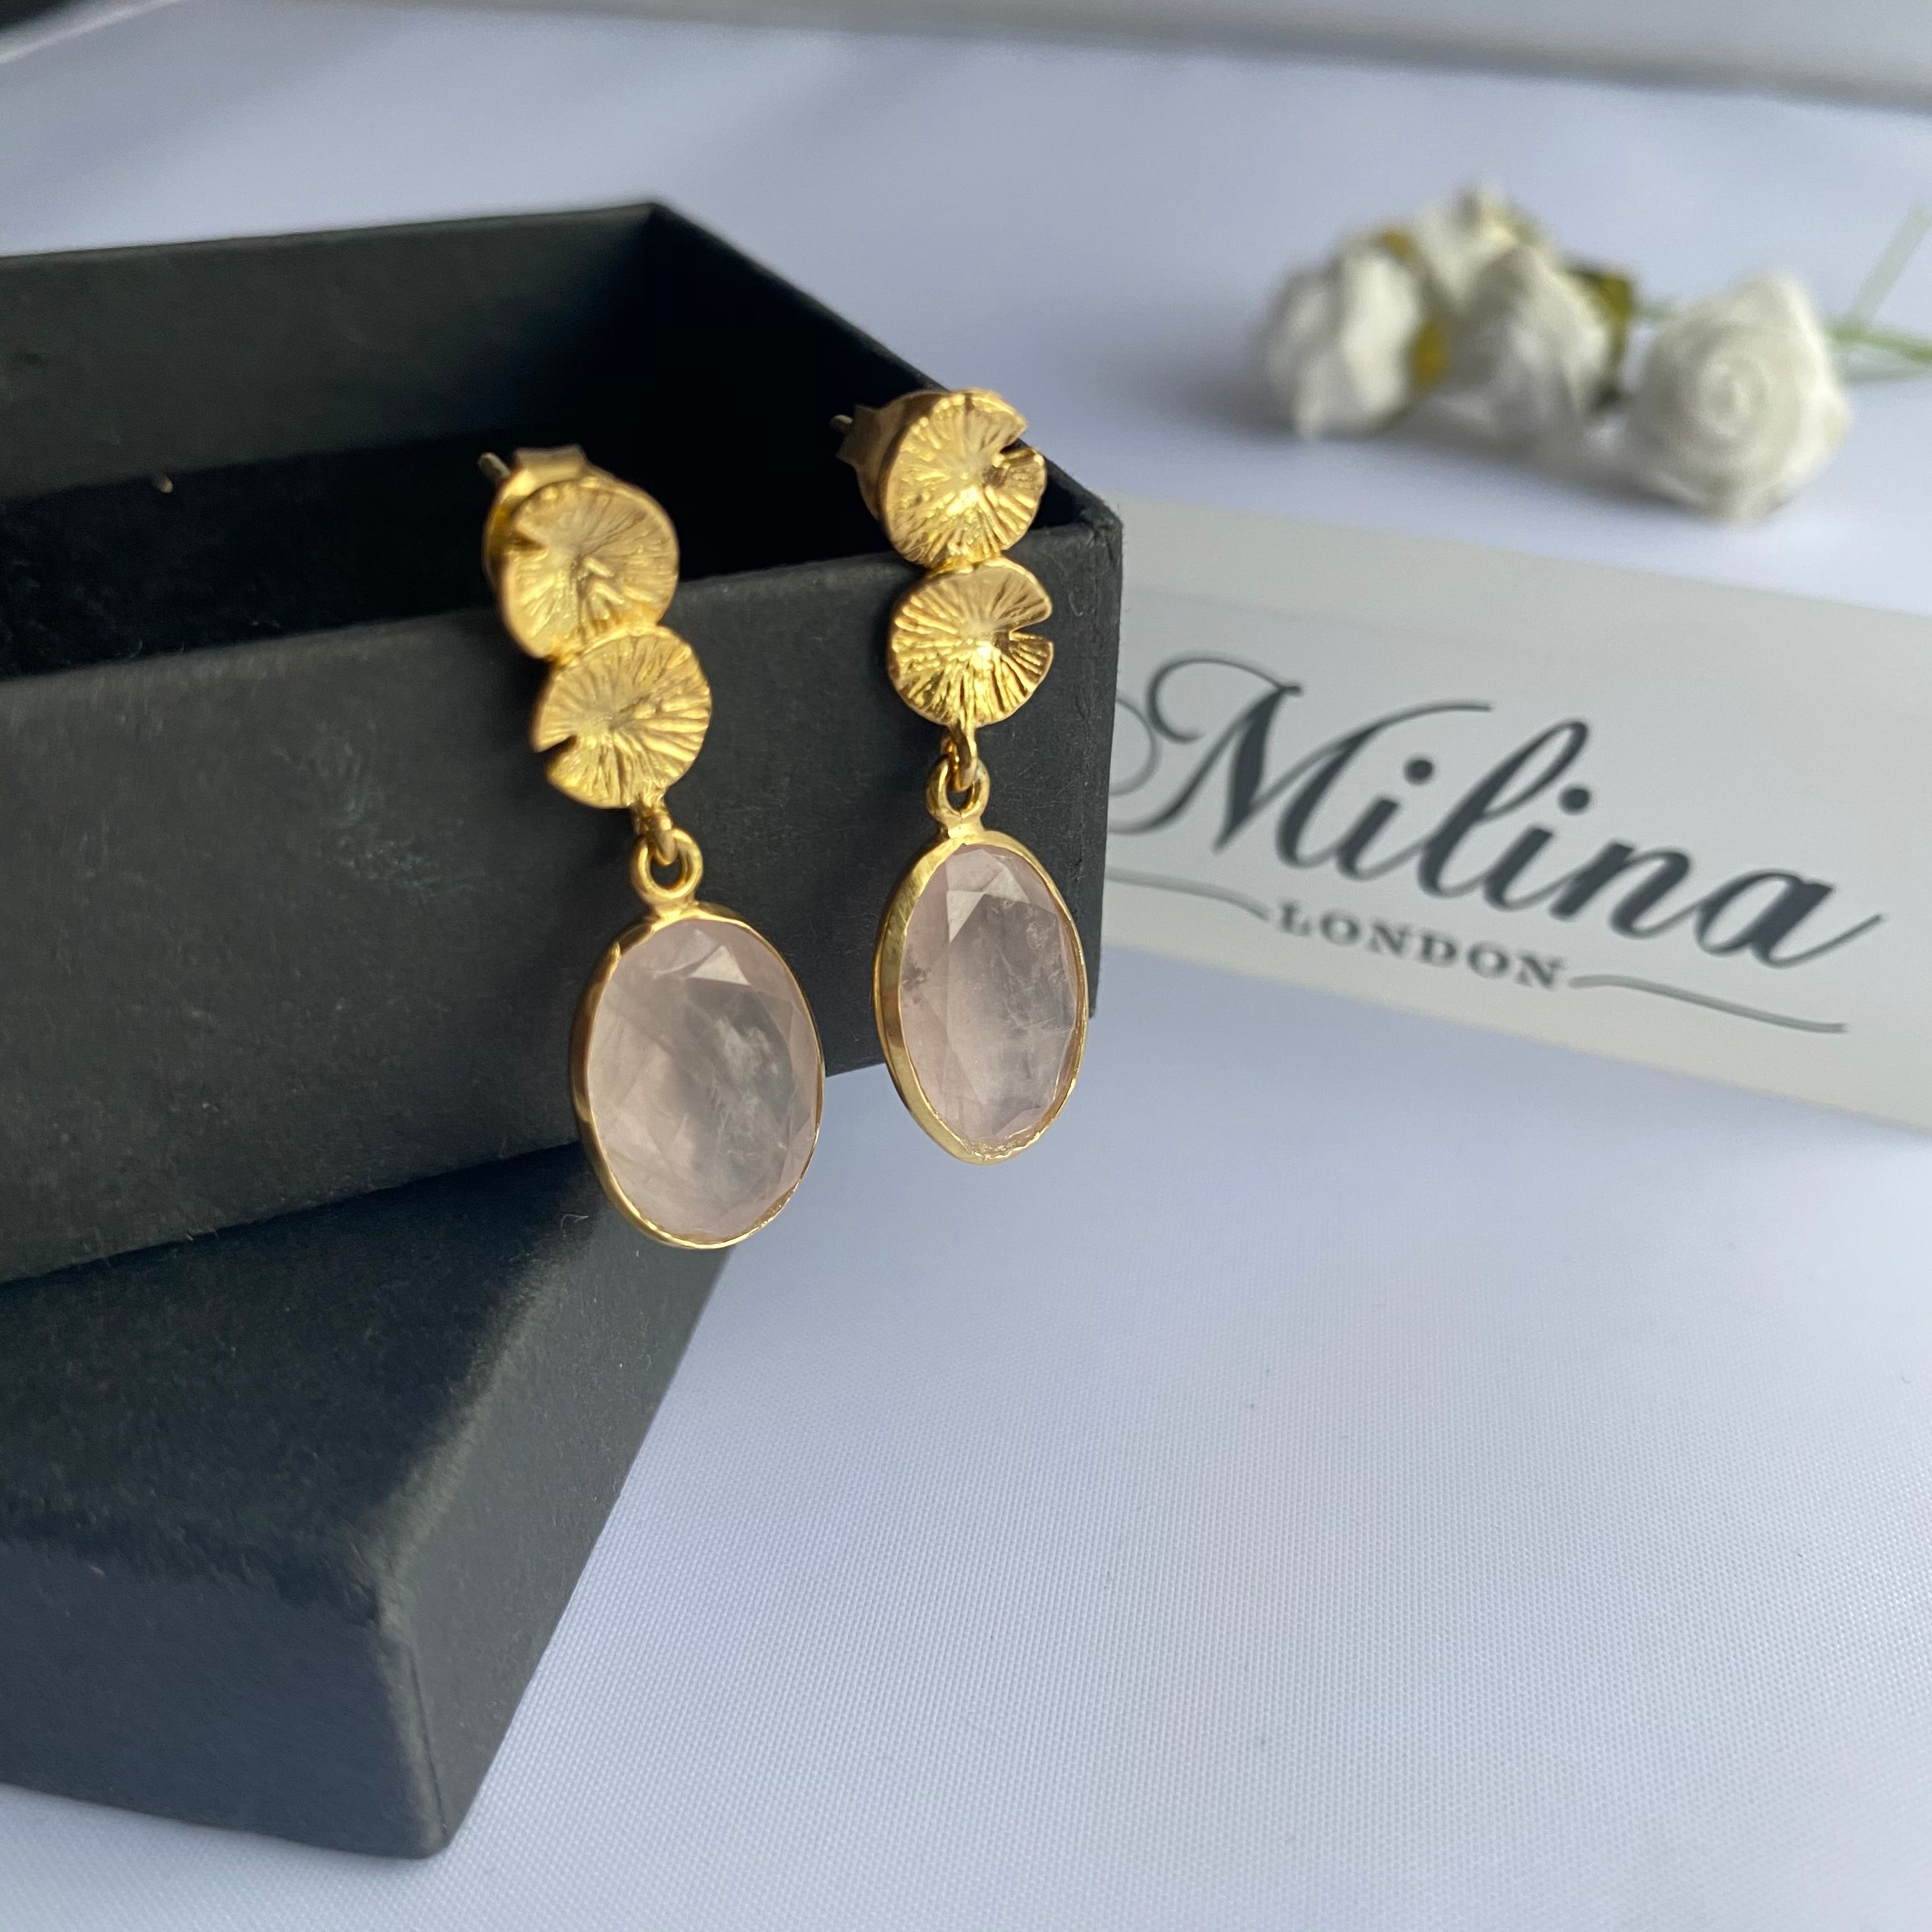 Lily Pad Earrings in Gold Plated Sterling Silver with a Rose Quartz Gemstone Drop